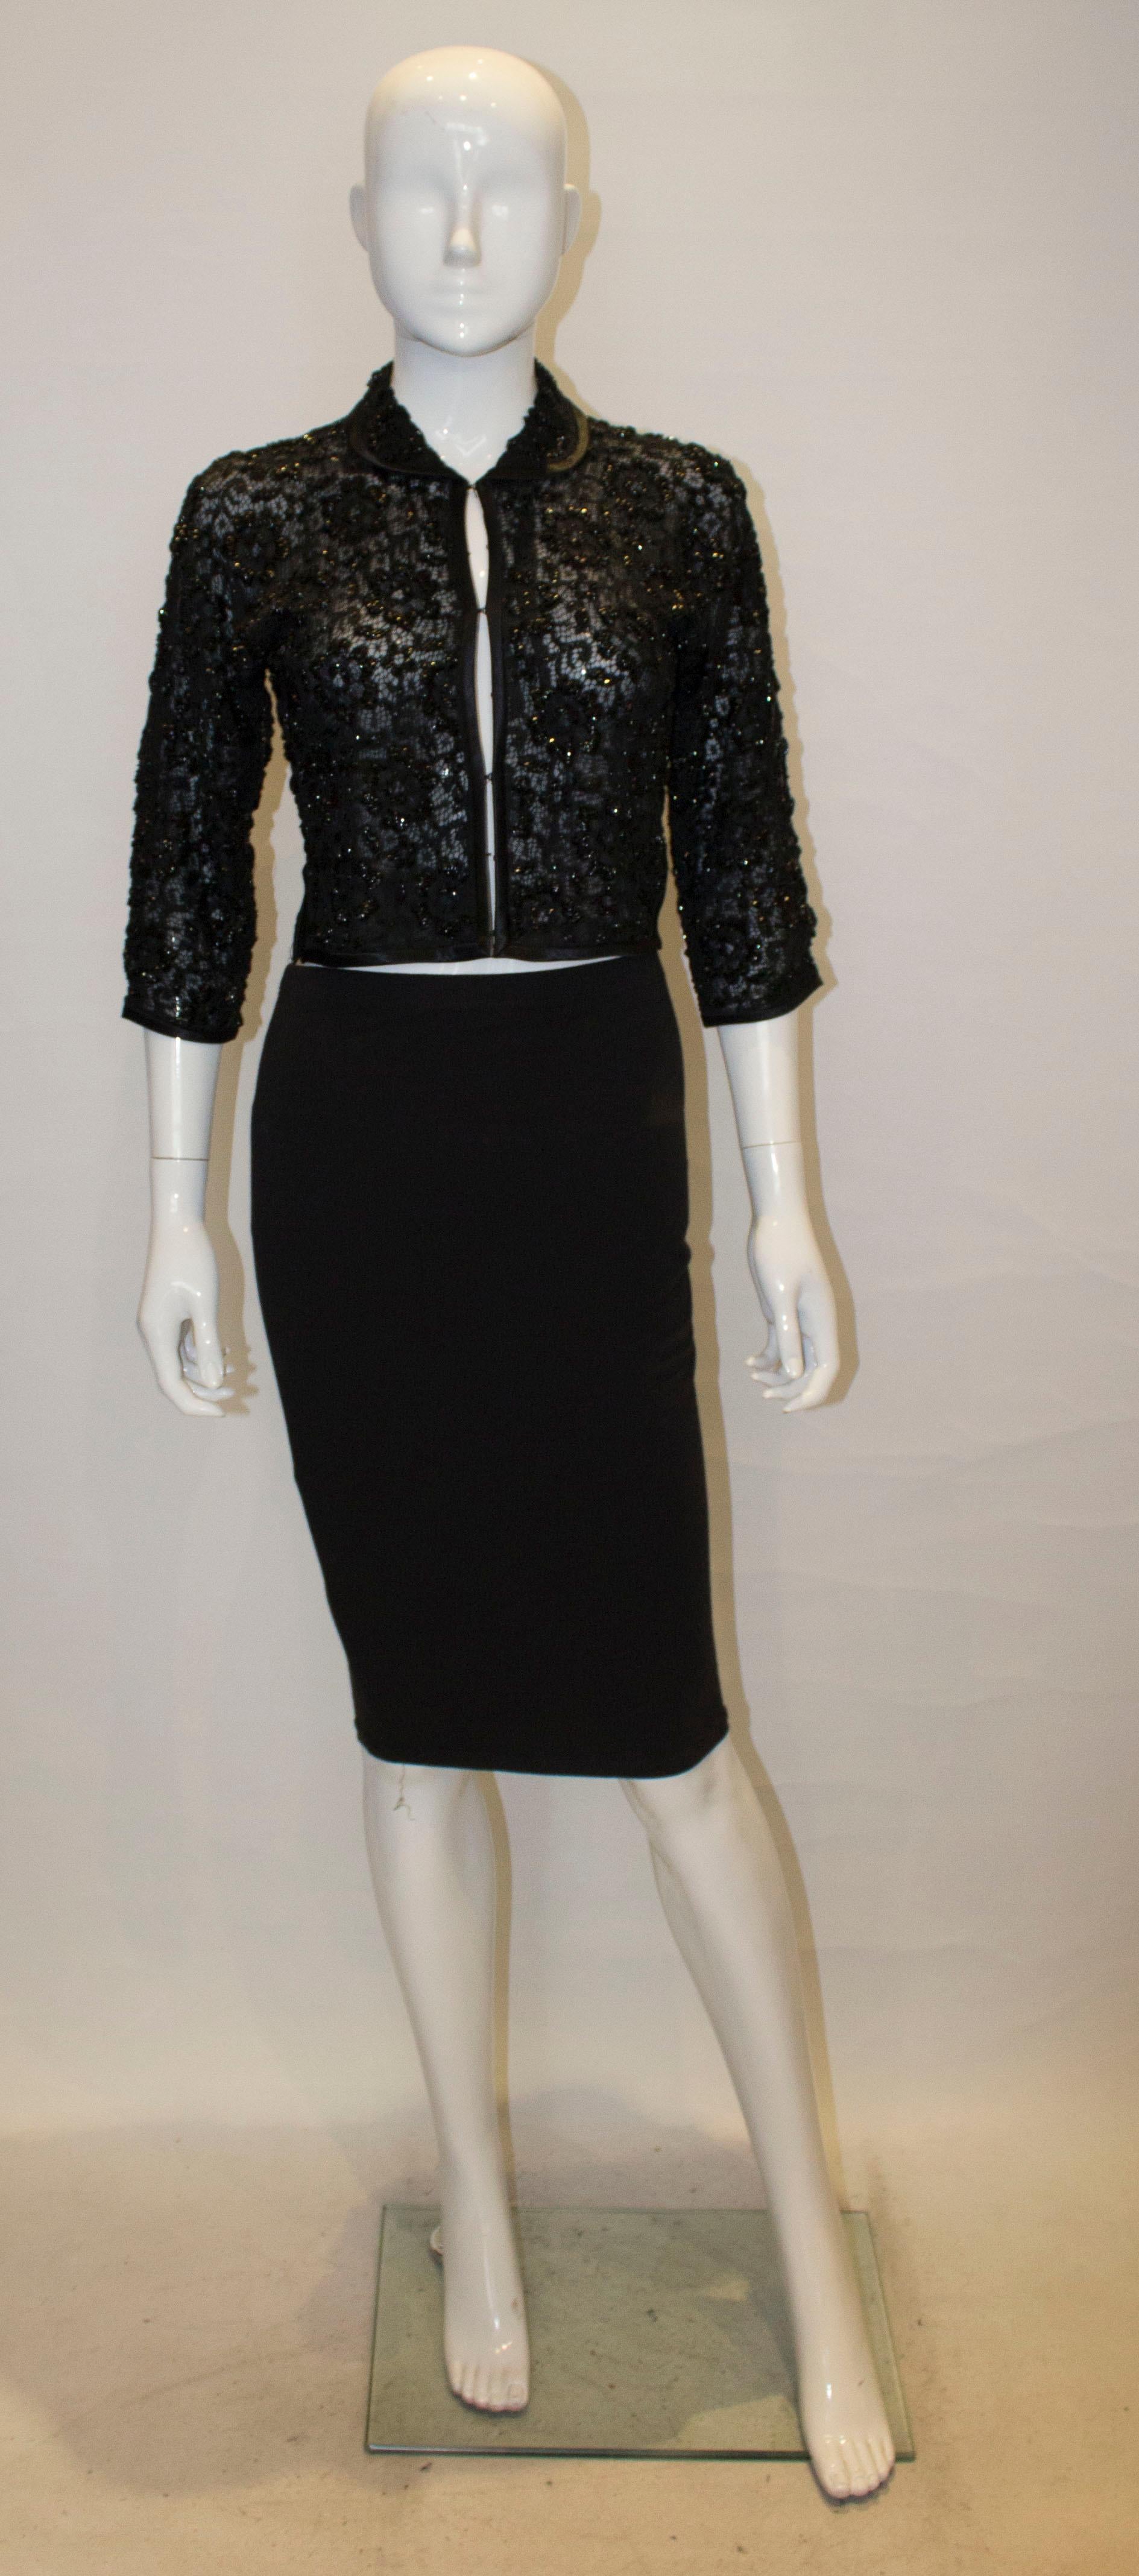 A chic vintage black beaded evening jacket , with a ribbon trim collar and crepe lining. The jacket has two 2'' side slits with hook and eye fastening.